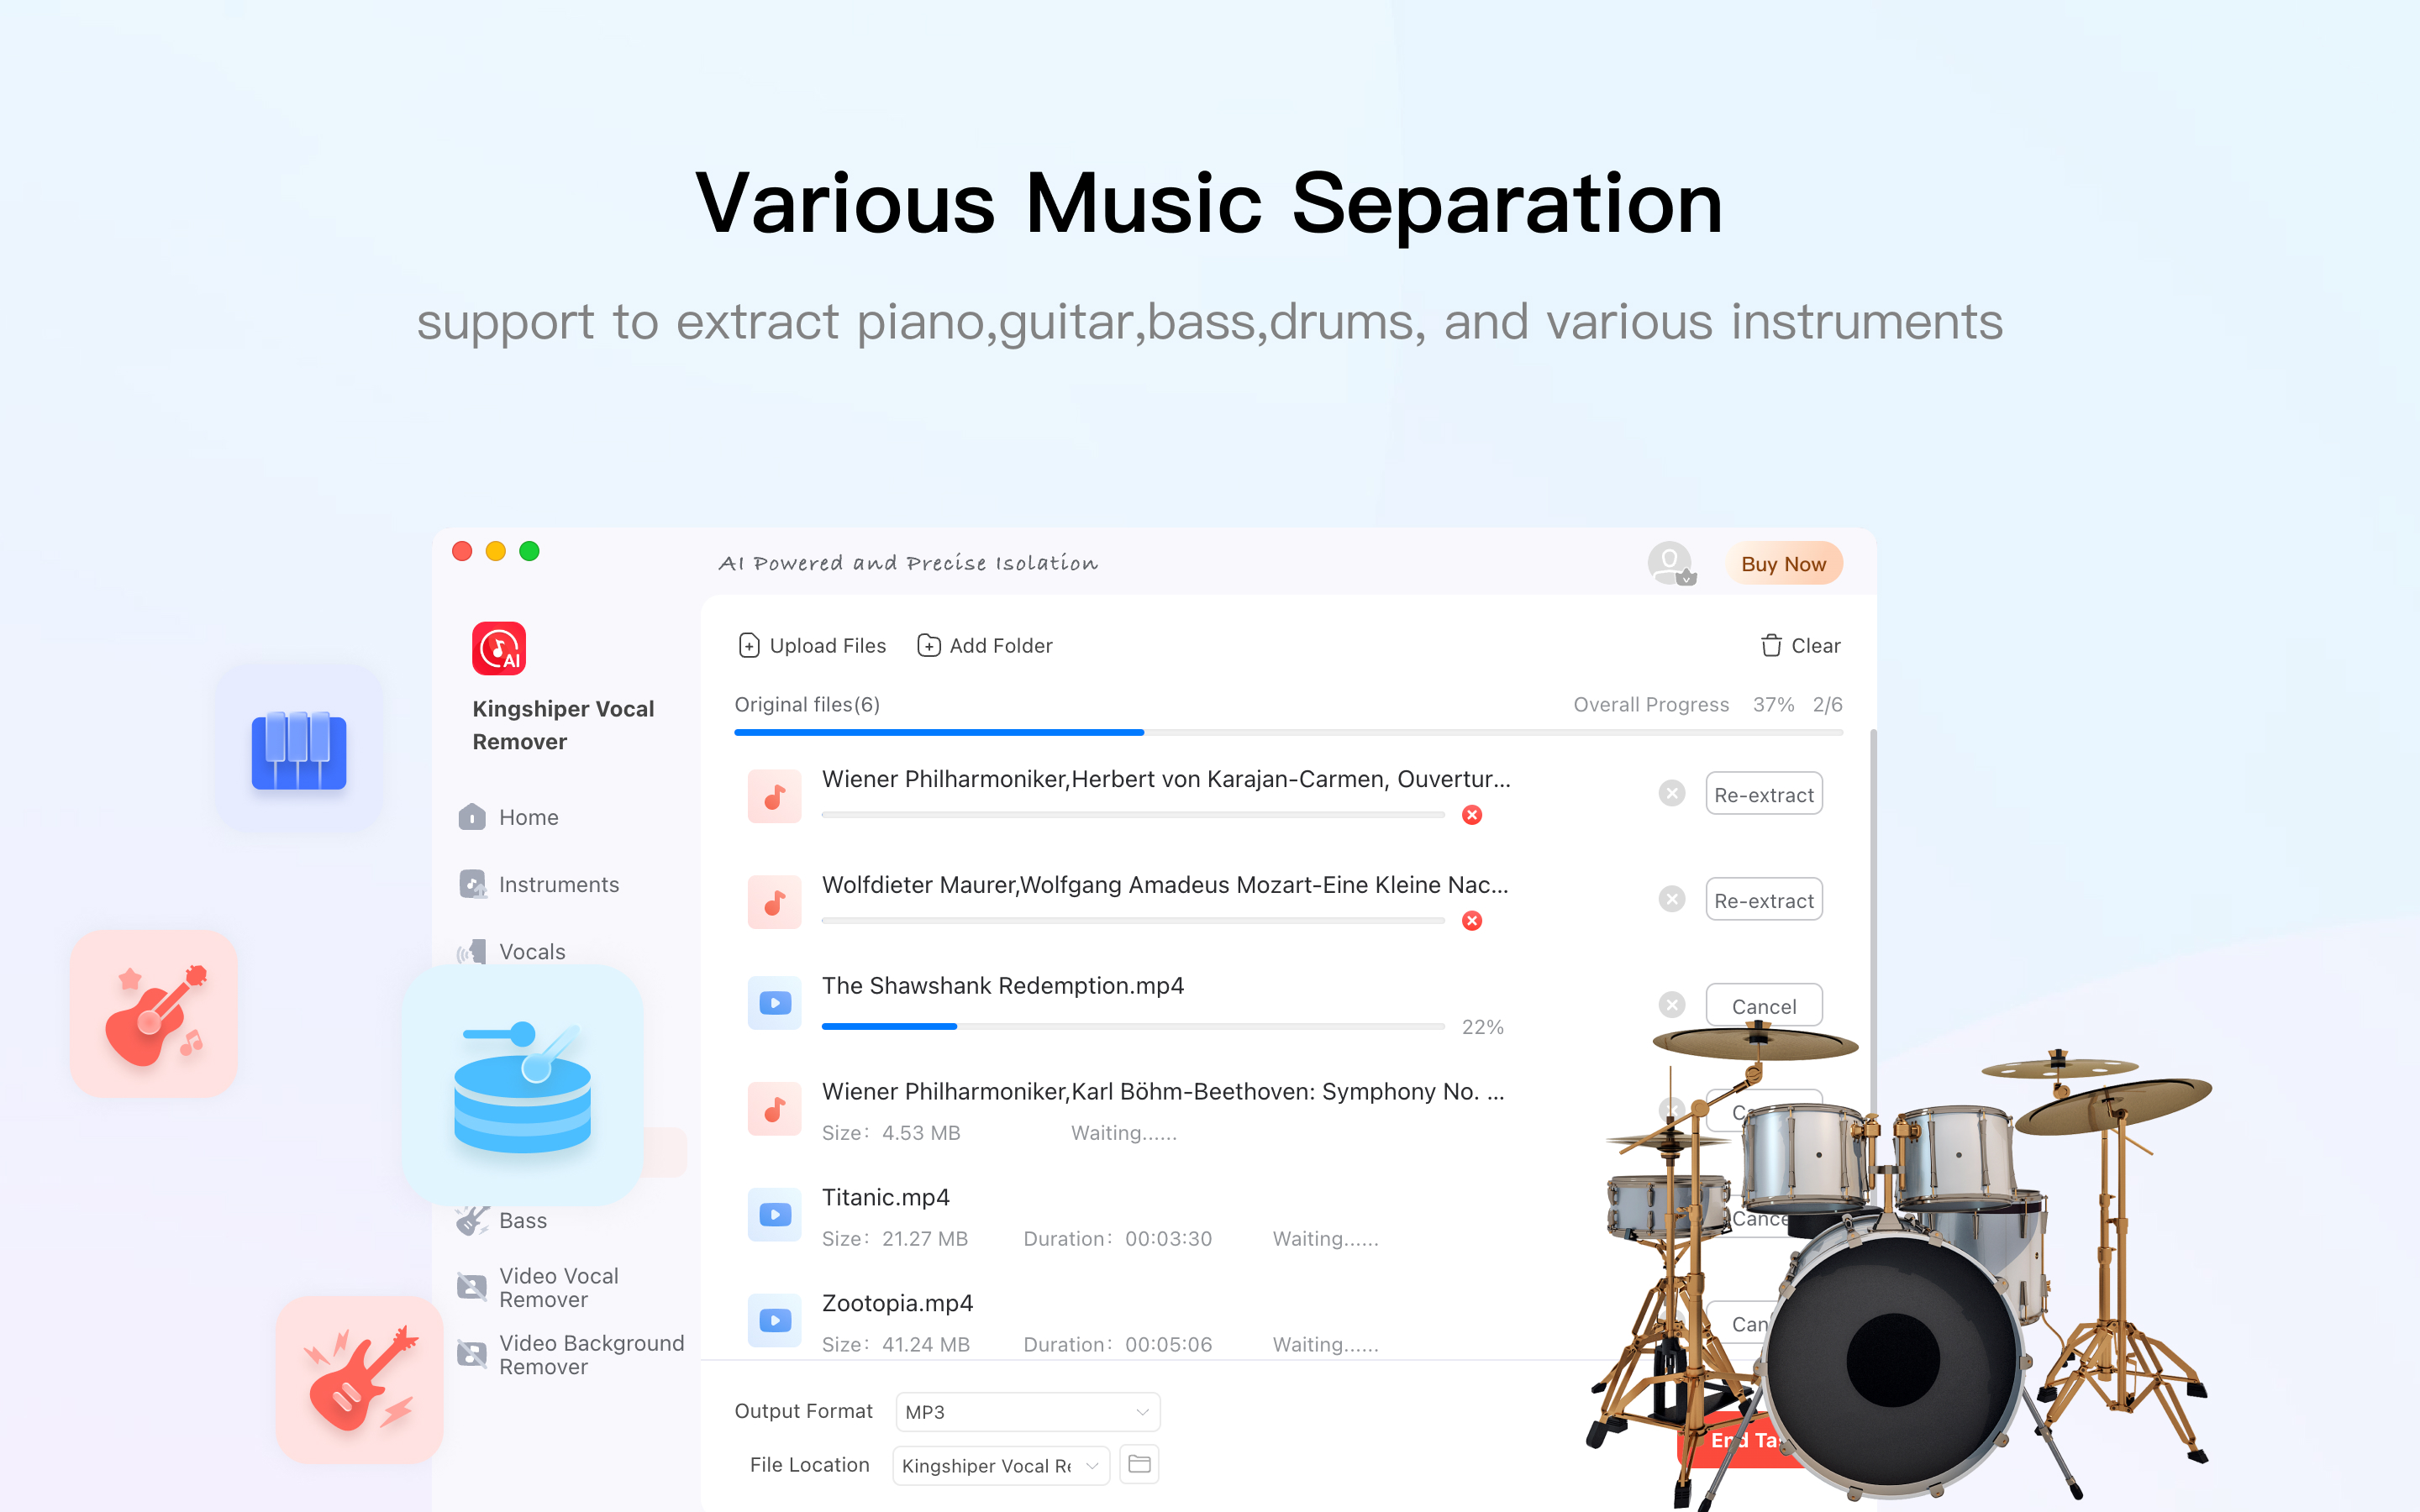 Support to extract piano, guitar, bass, drums, and various instruments